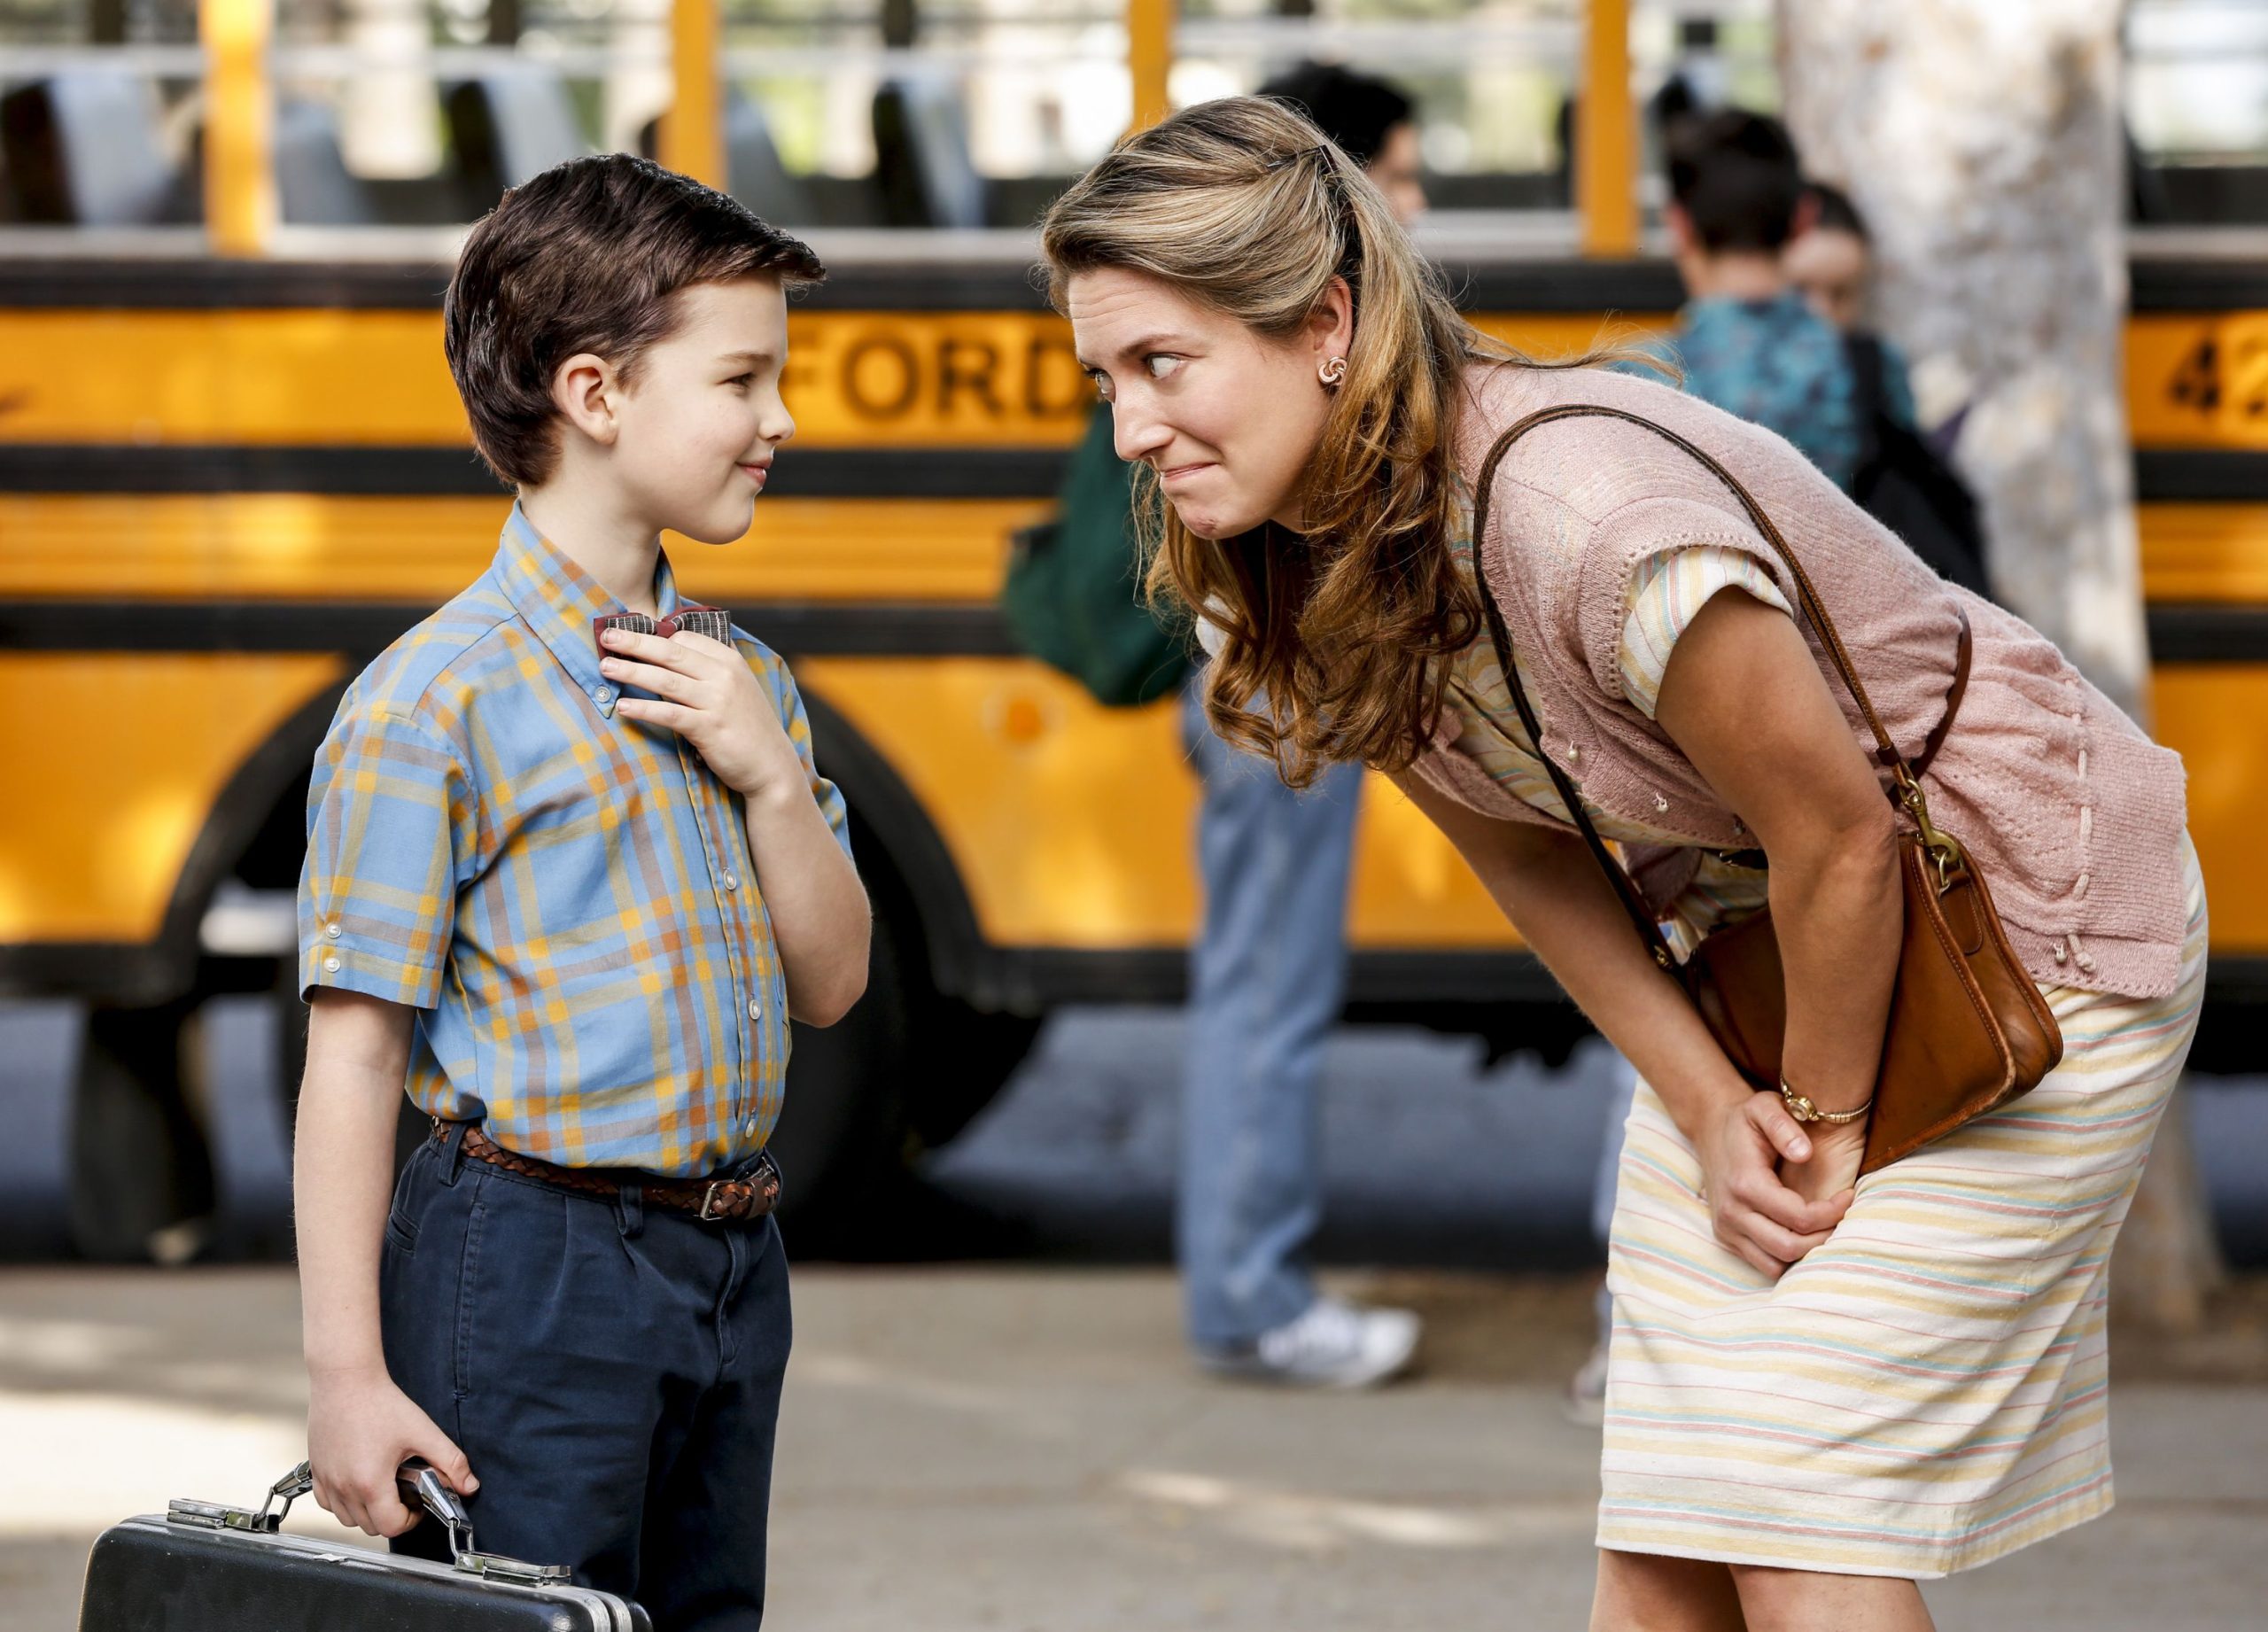 Netflix Welcomes 'Young Sheldon' Inside the Final Season of the Beloved Series